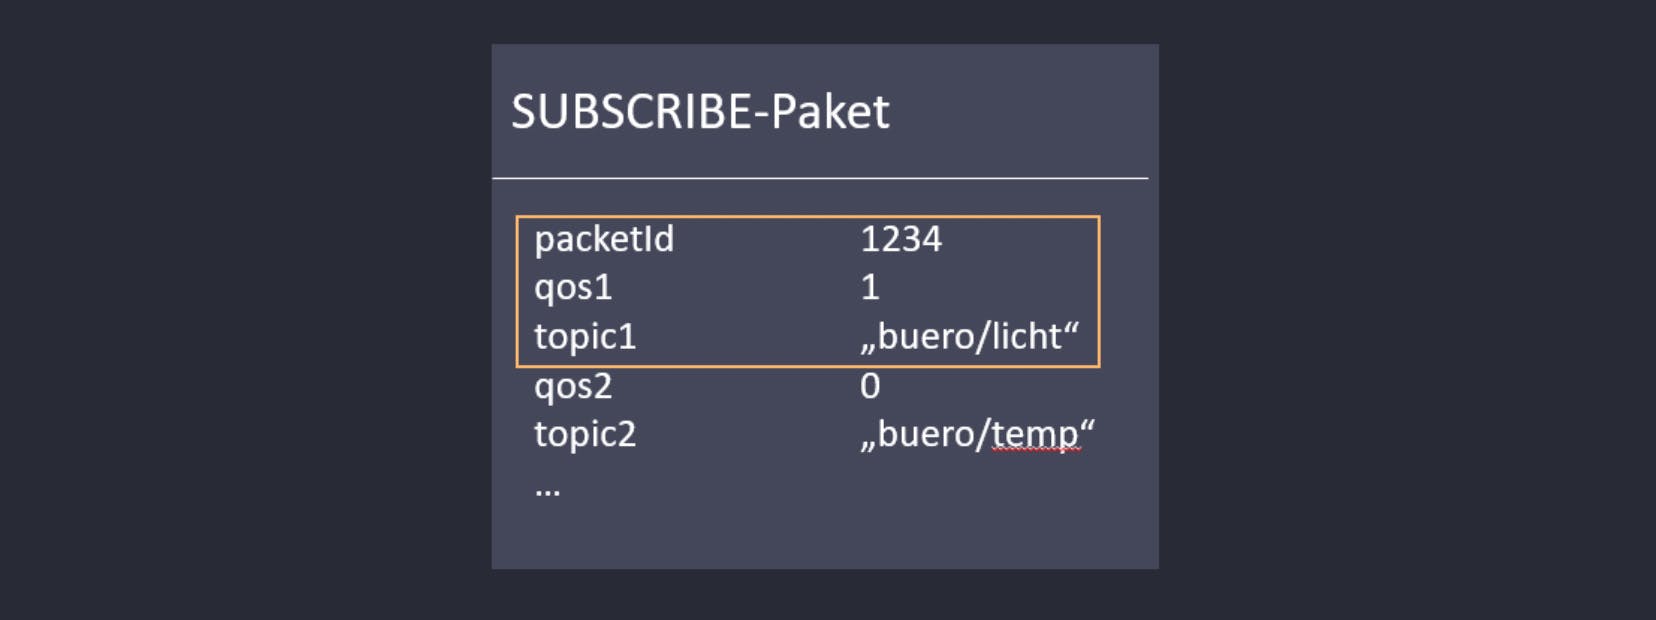 Example of a Subscribe package